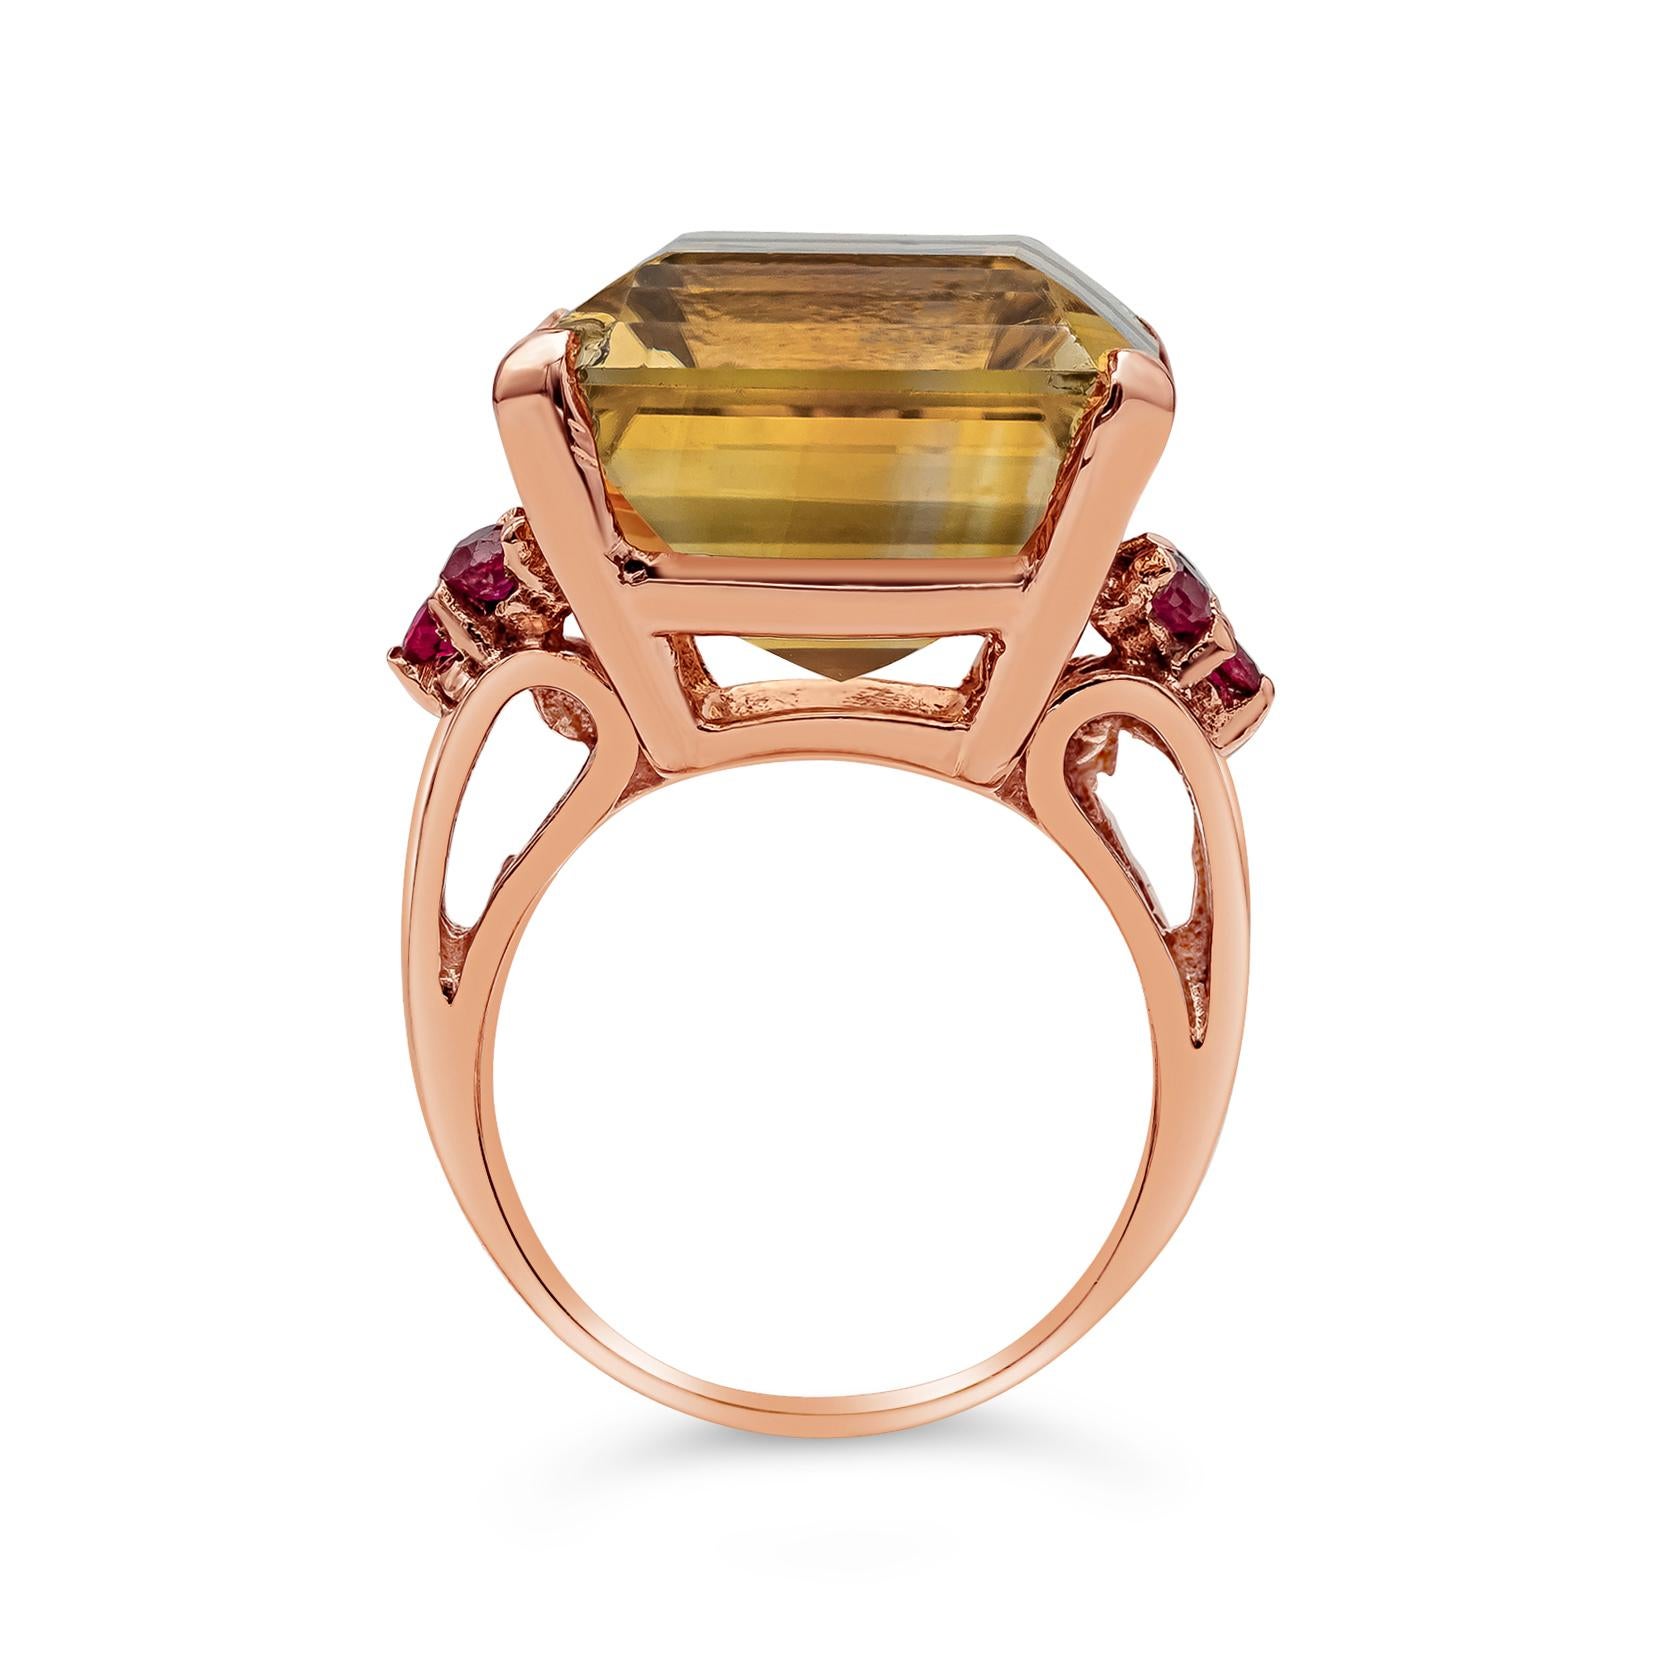 23.92 Carats Emerald Cut Golden Citrine and Round Ruby Cocktail Ring  In Good Condition For Sale In New York, NY